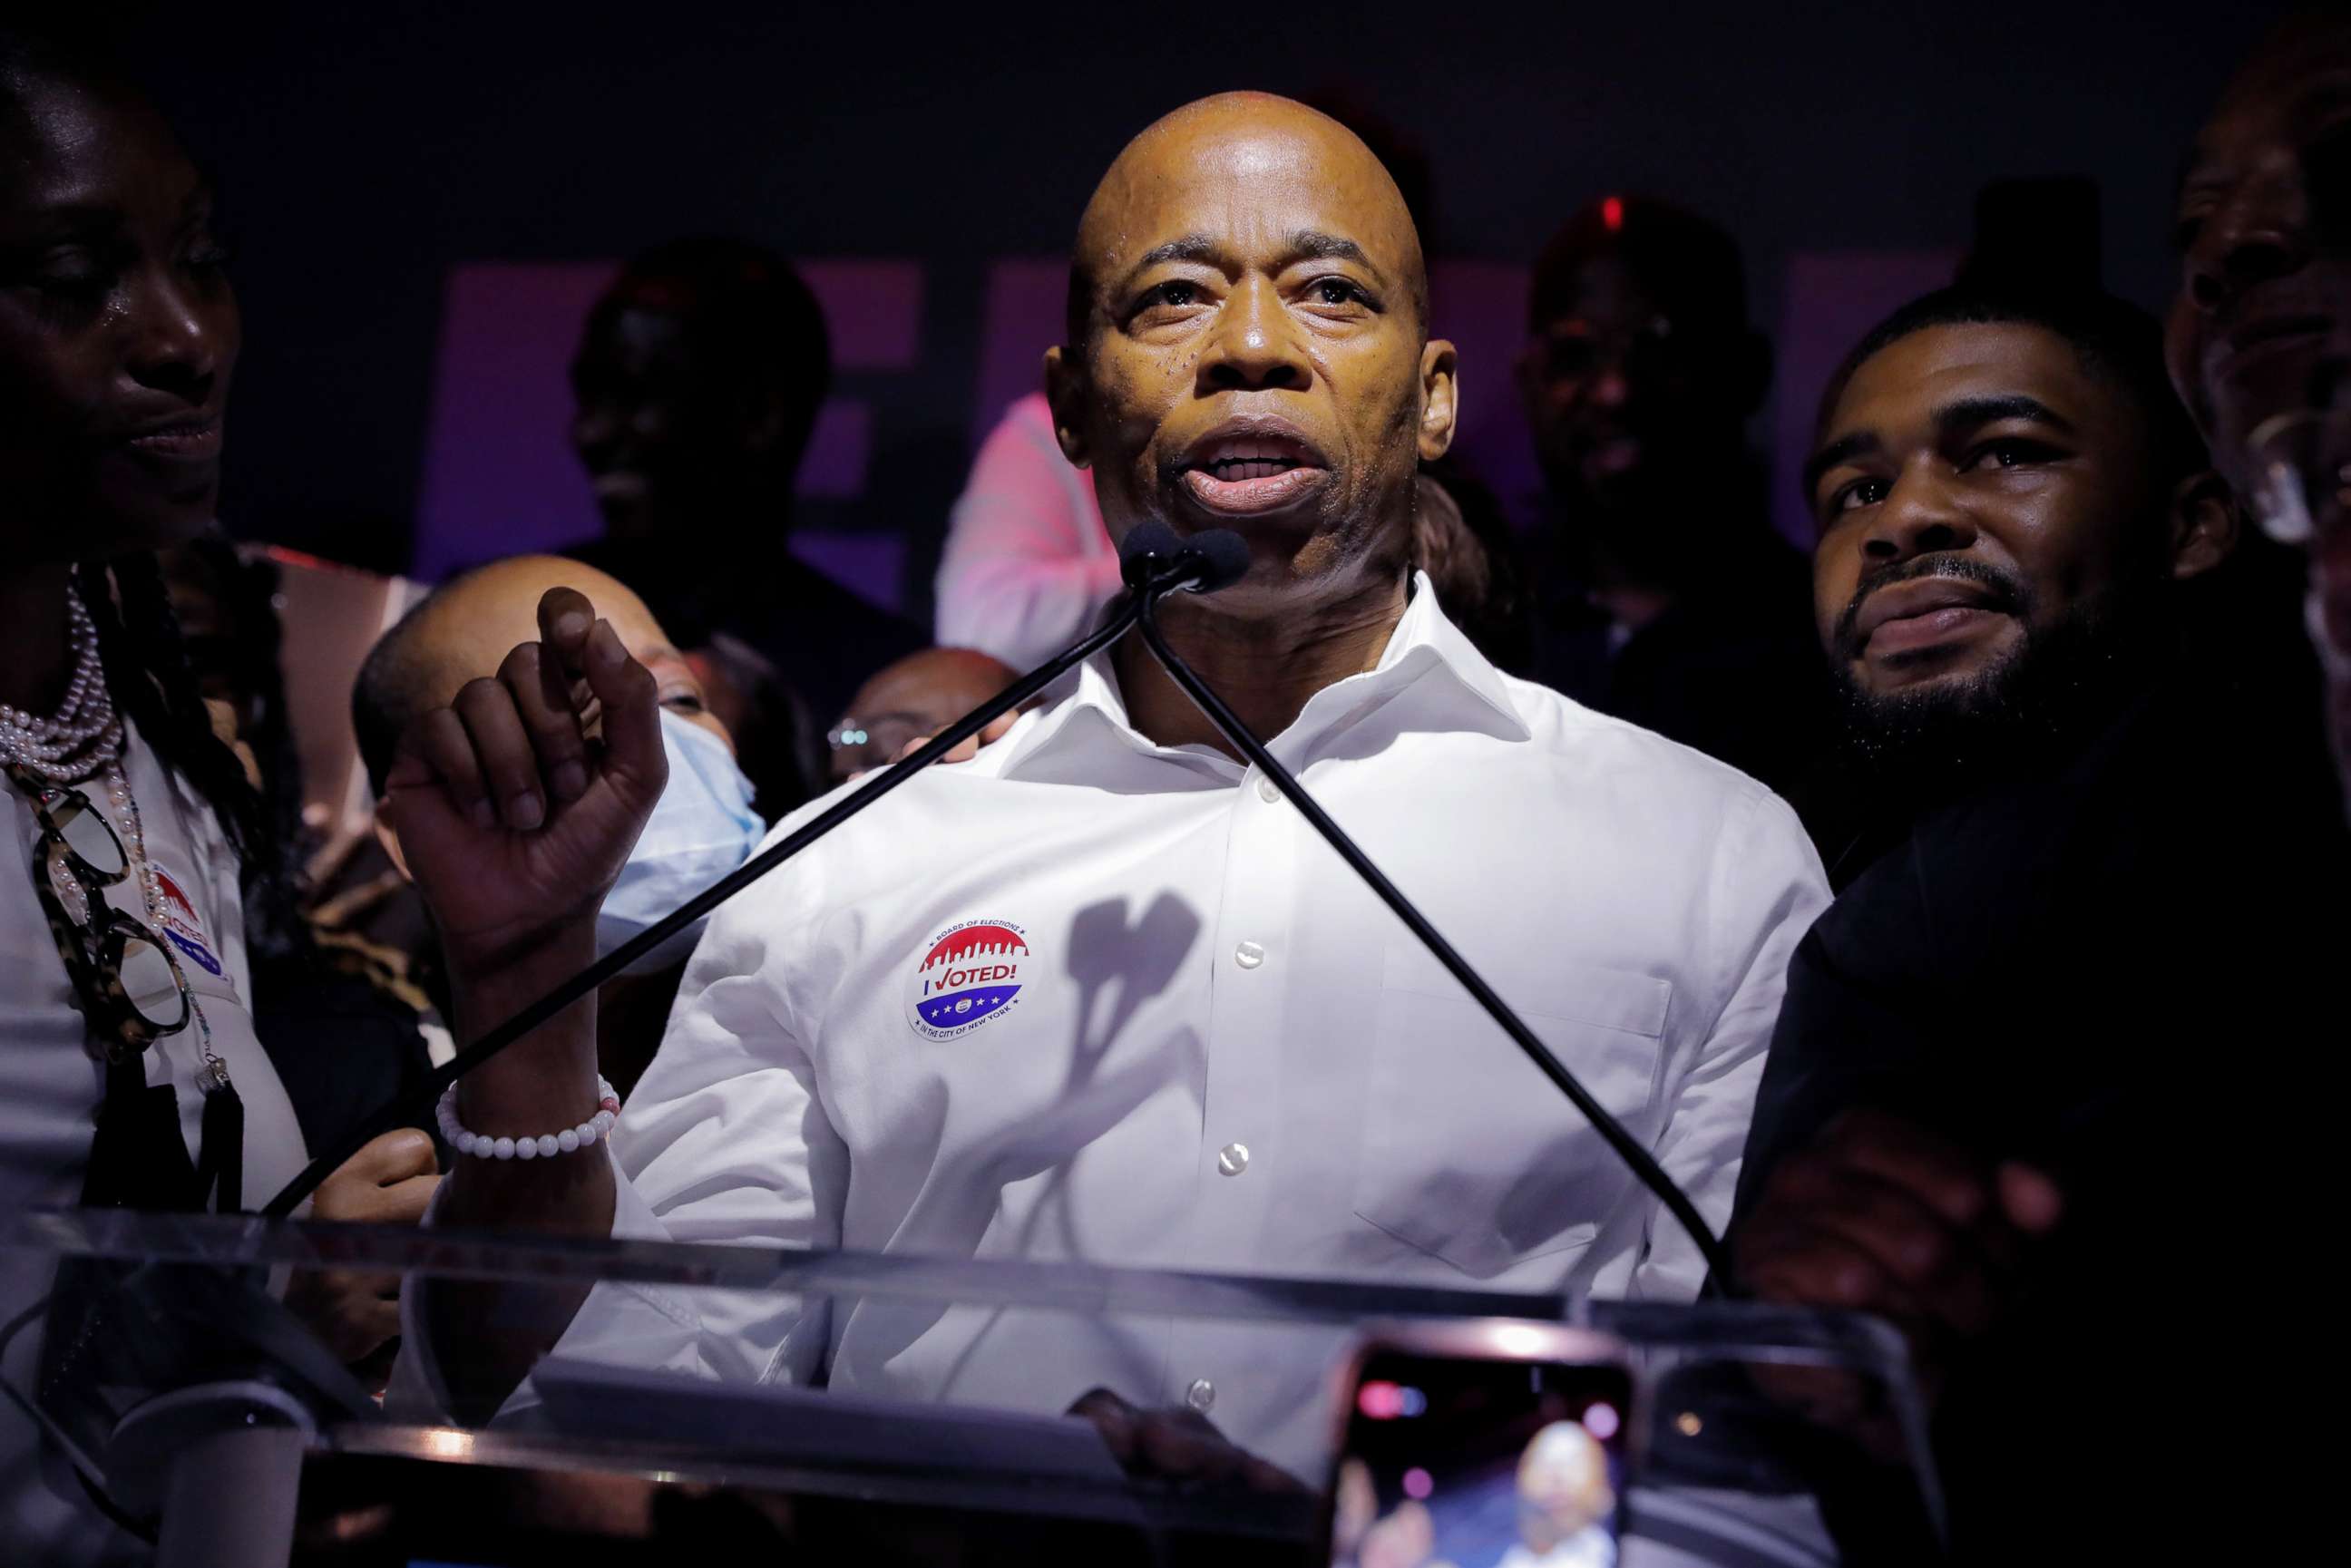 PHOTO: Eric Adams speaks at a New York City primary mayoral election night party in New York City, June 22, 2021.